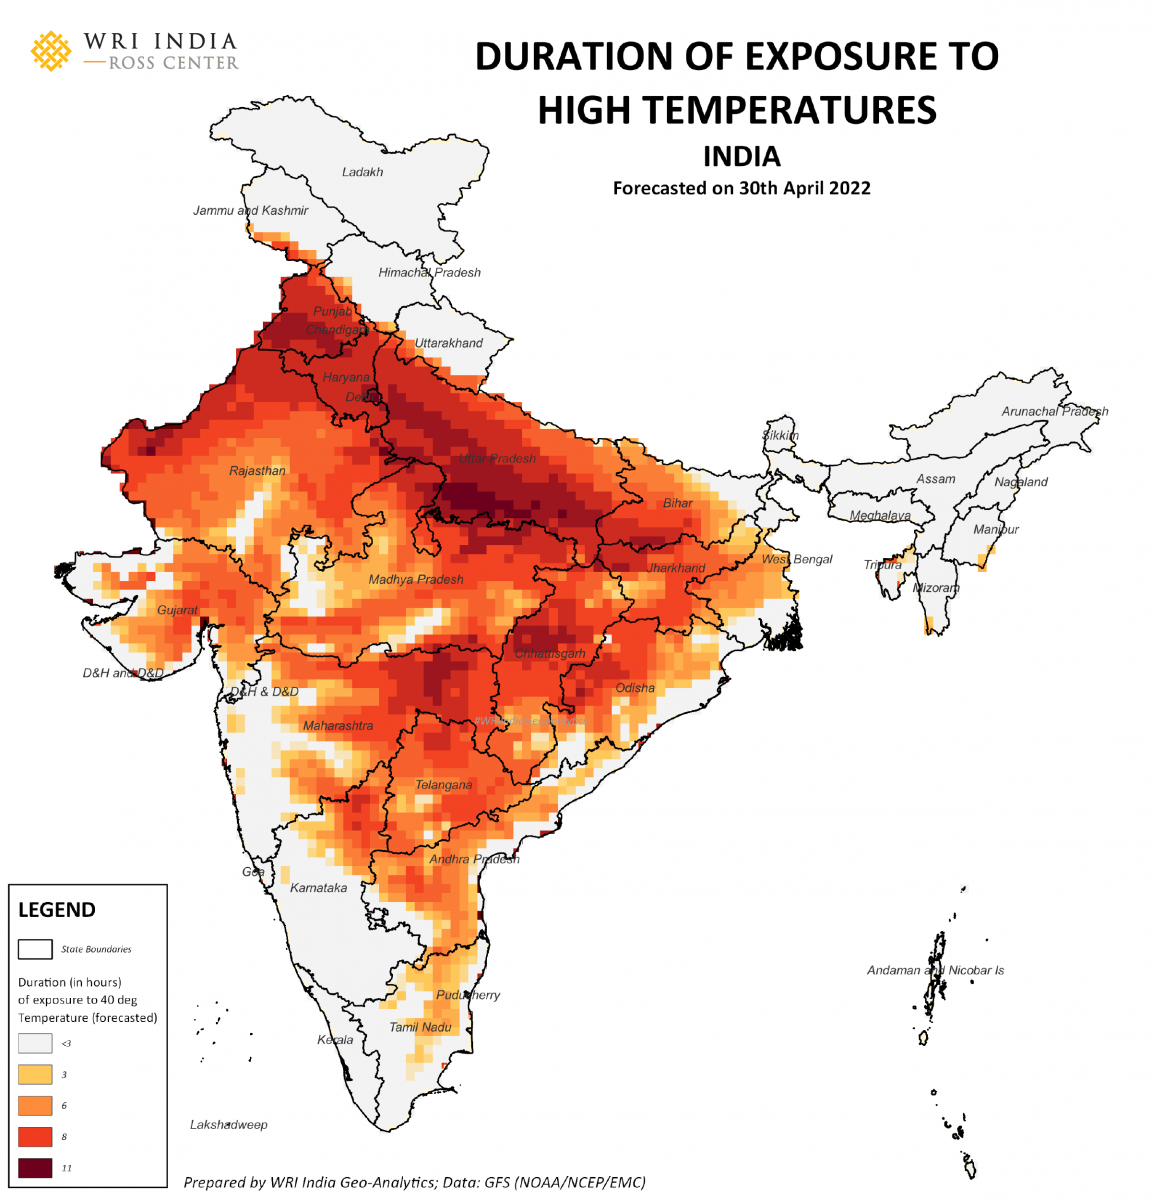 Map shows duration of exposure to high temperatures for 30 April